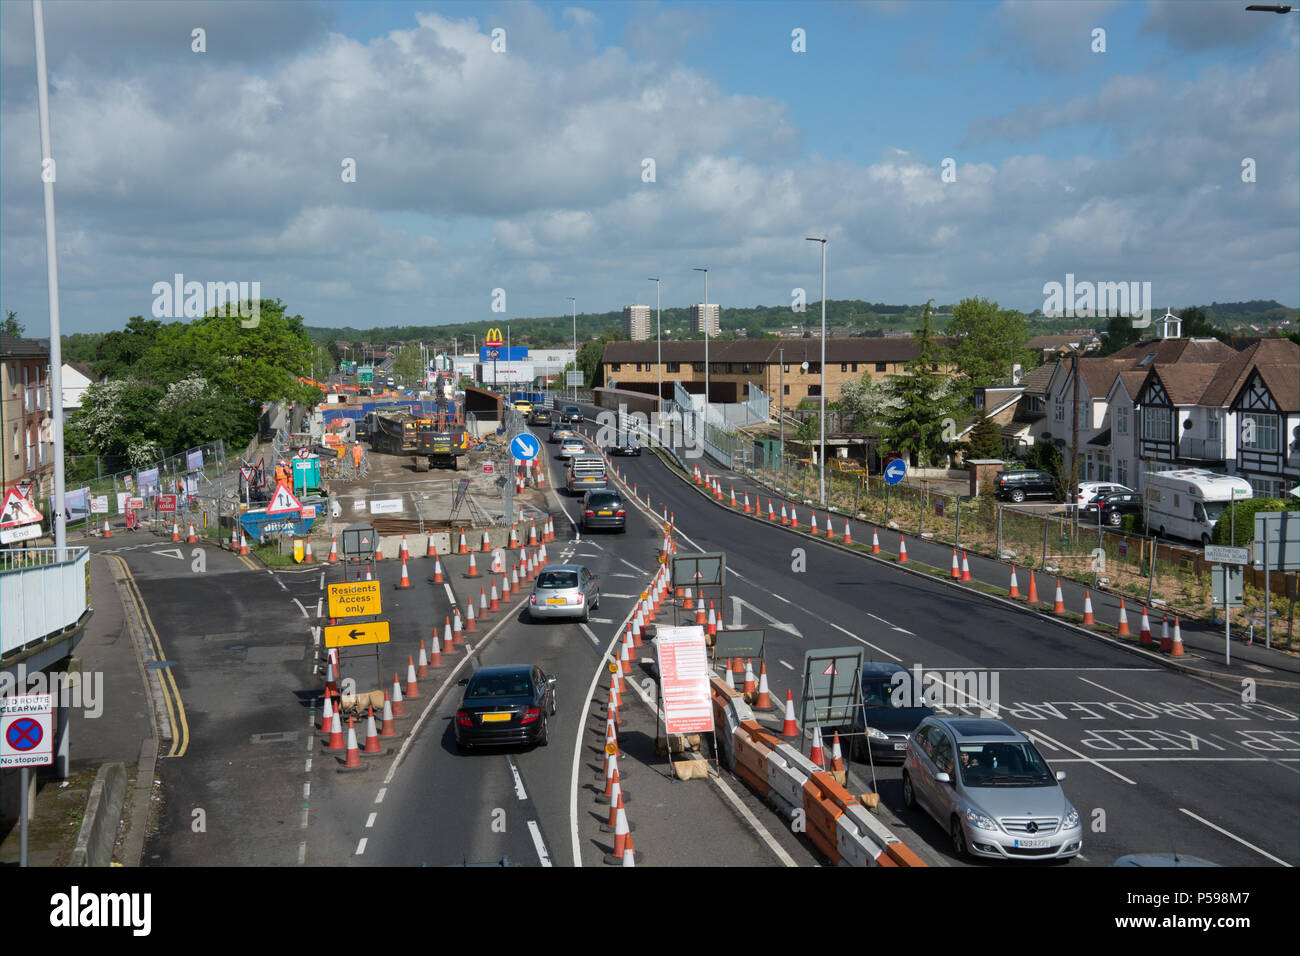 Bridge replacement roads works on the A127 at Ardleigh Green Stock Photo